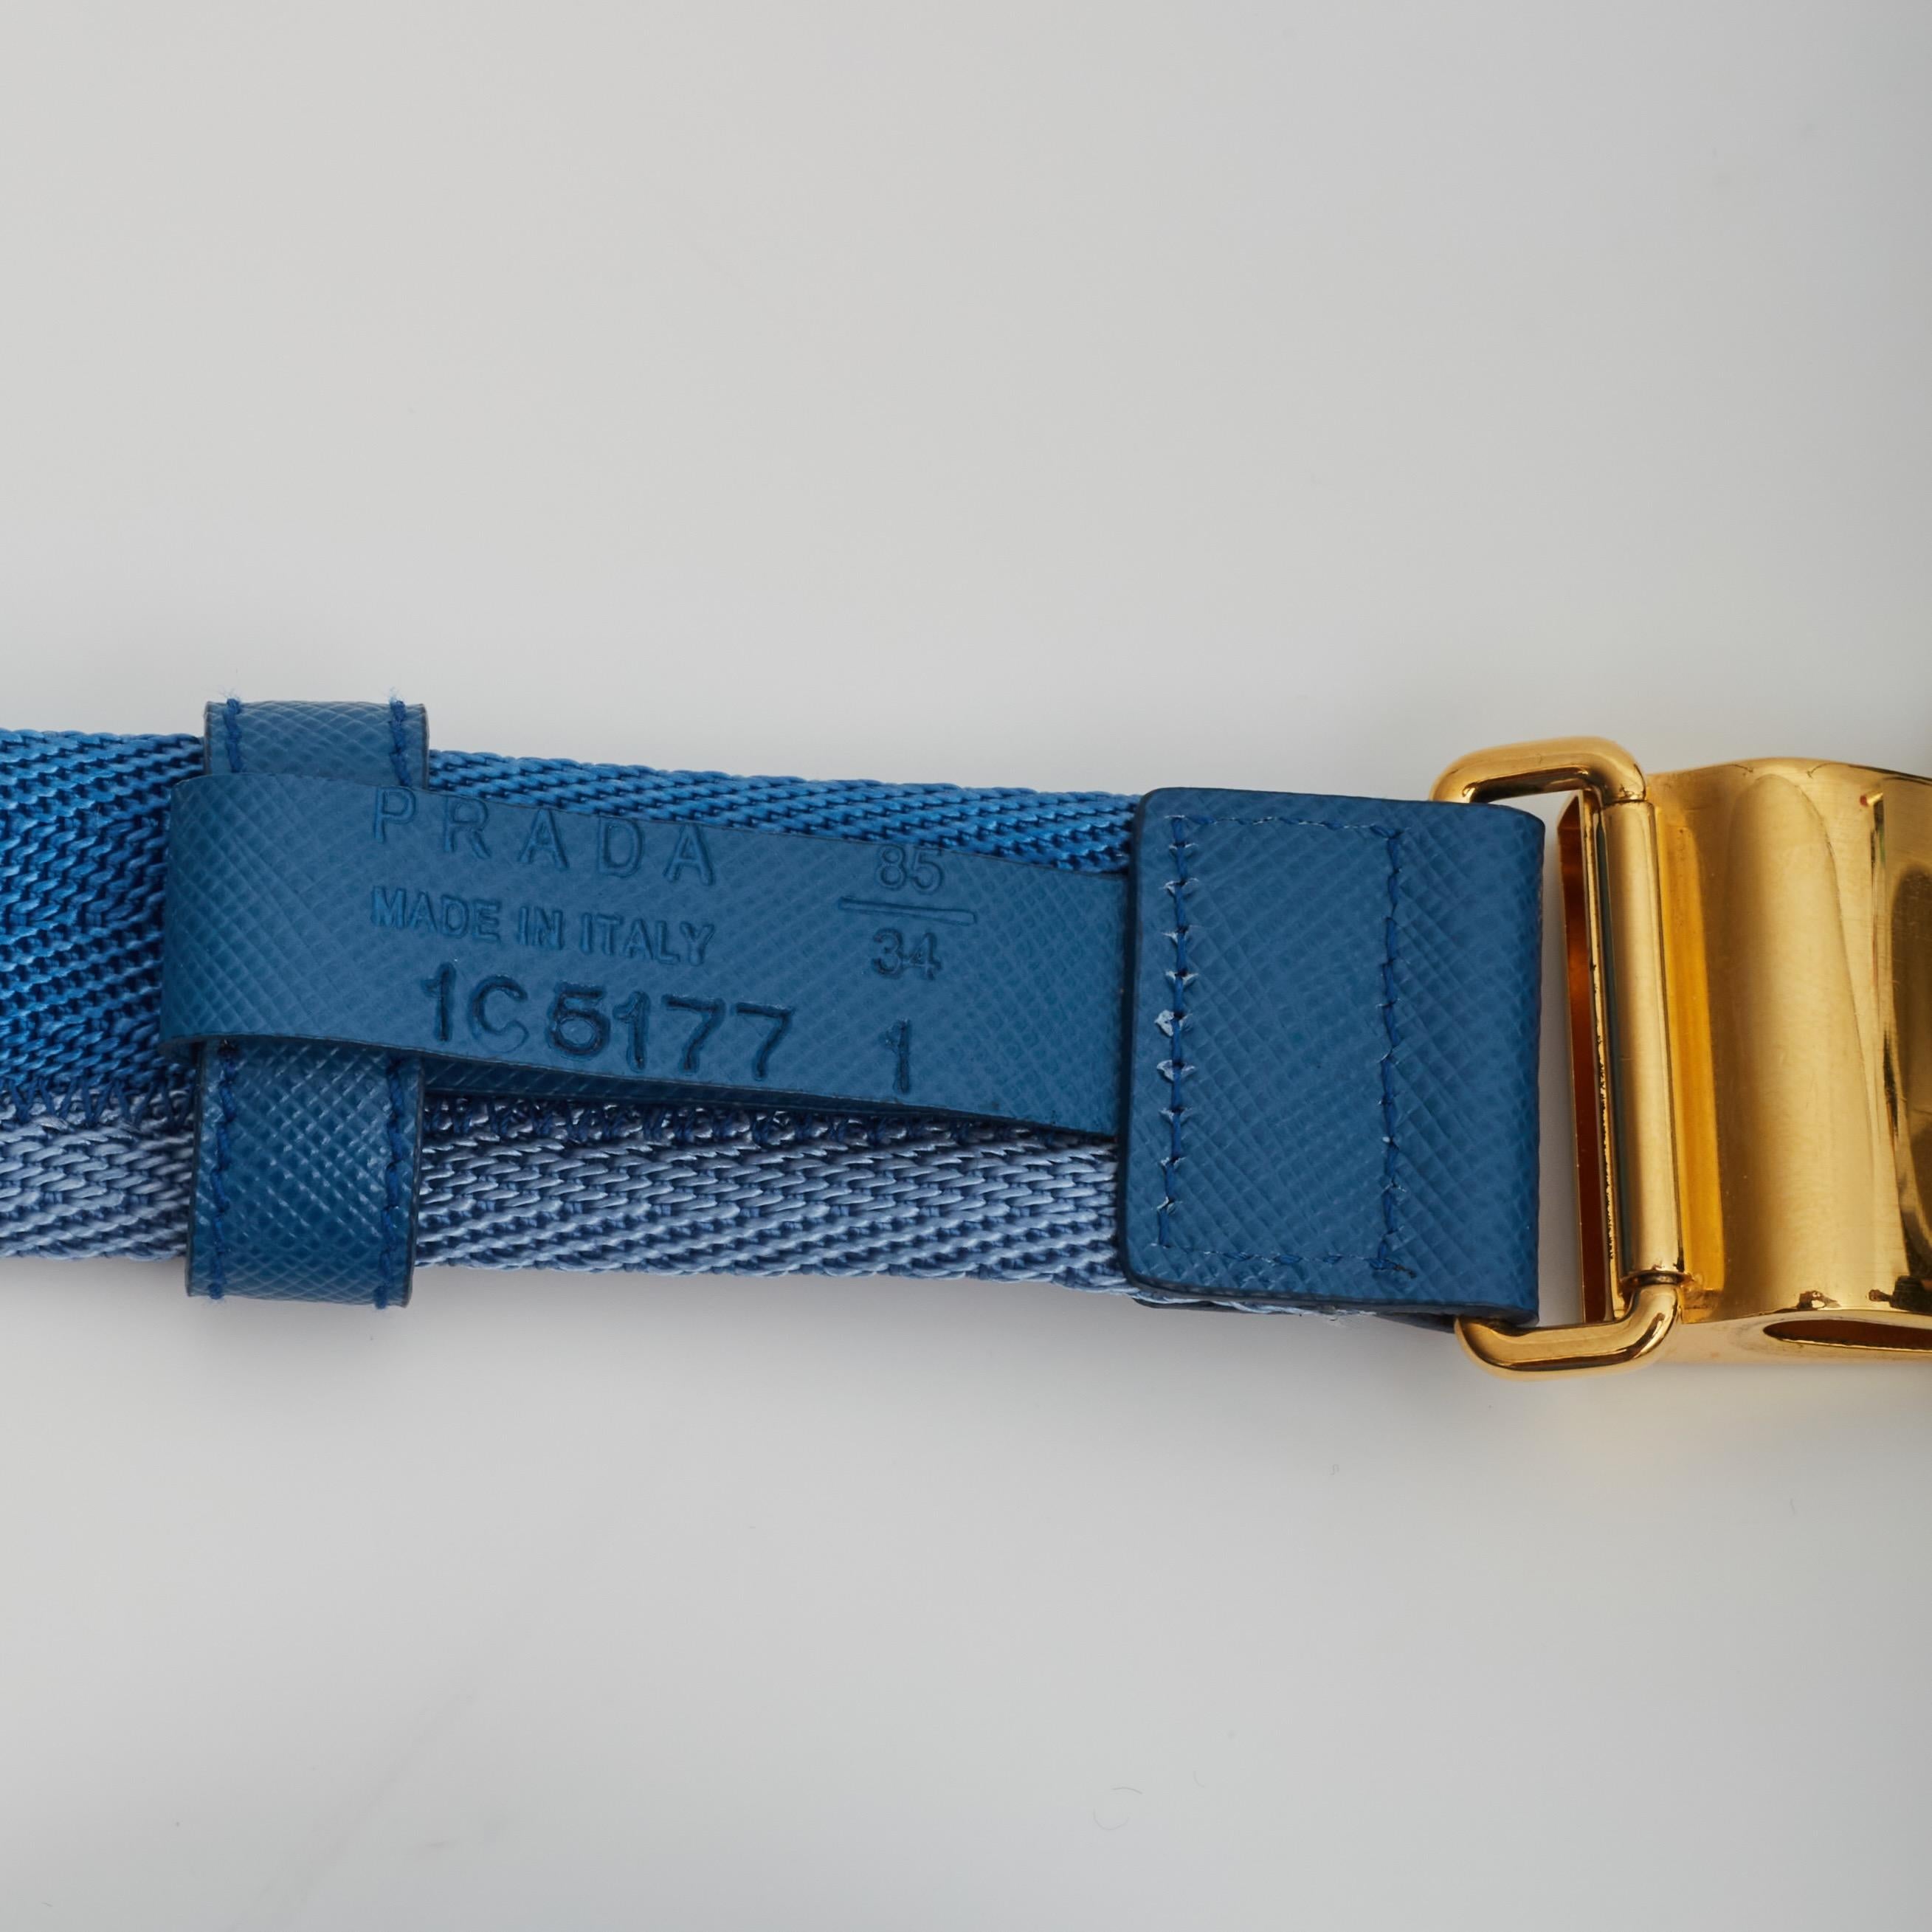 Beige Prada Vintage Woven Fabric Gold Buckle Blue 1C5177 (Size 85/31) For Sale